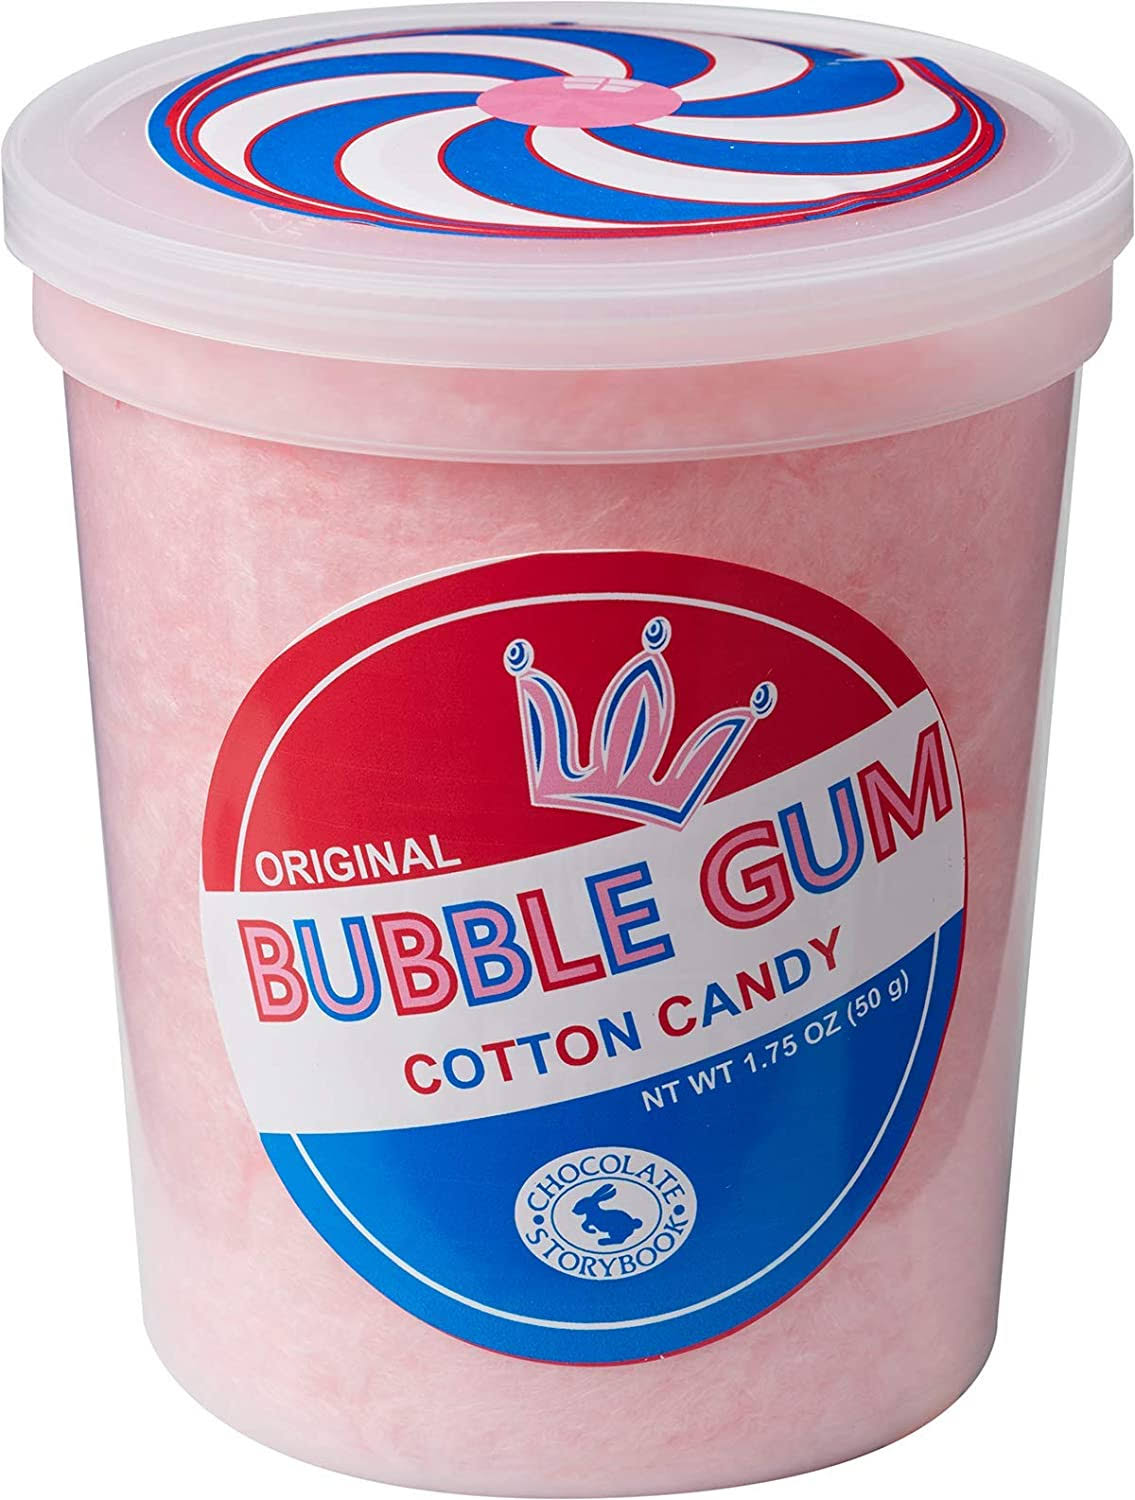 Chocolate Storybook Bubble Gum Flavor Cotton Candy